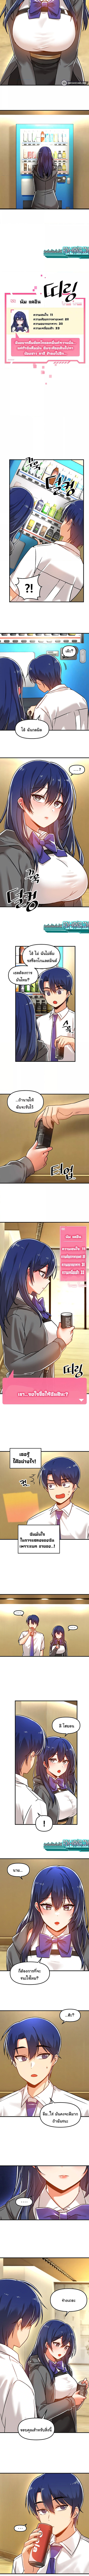 Trapped in the Academy’s Eroge 53 (3)